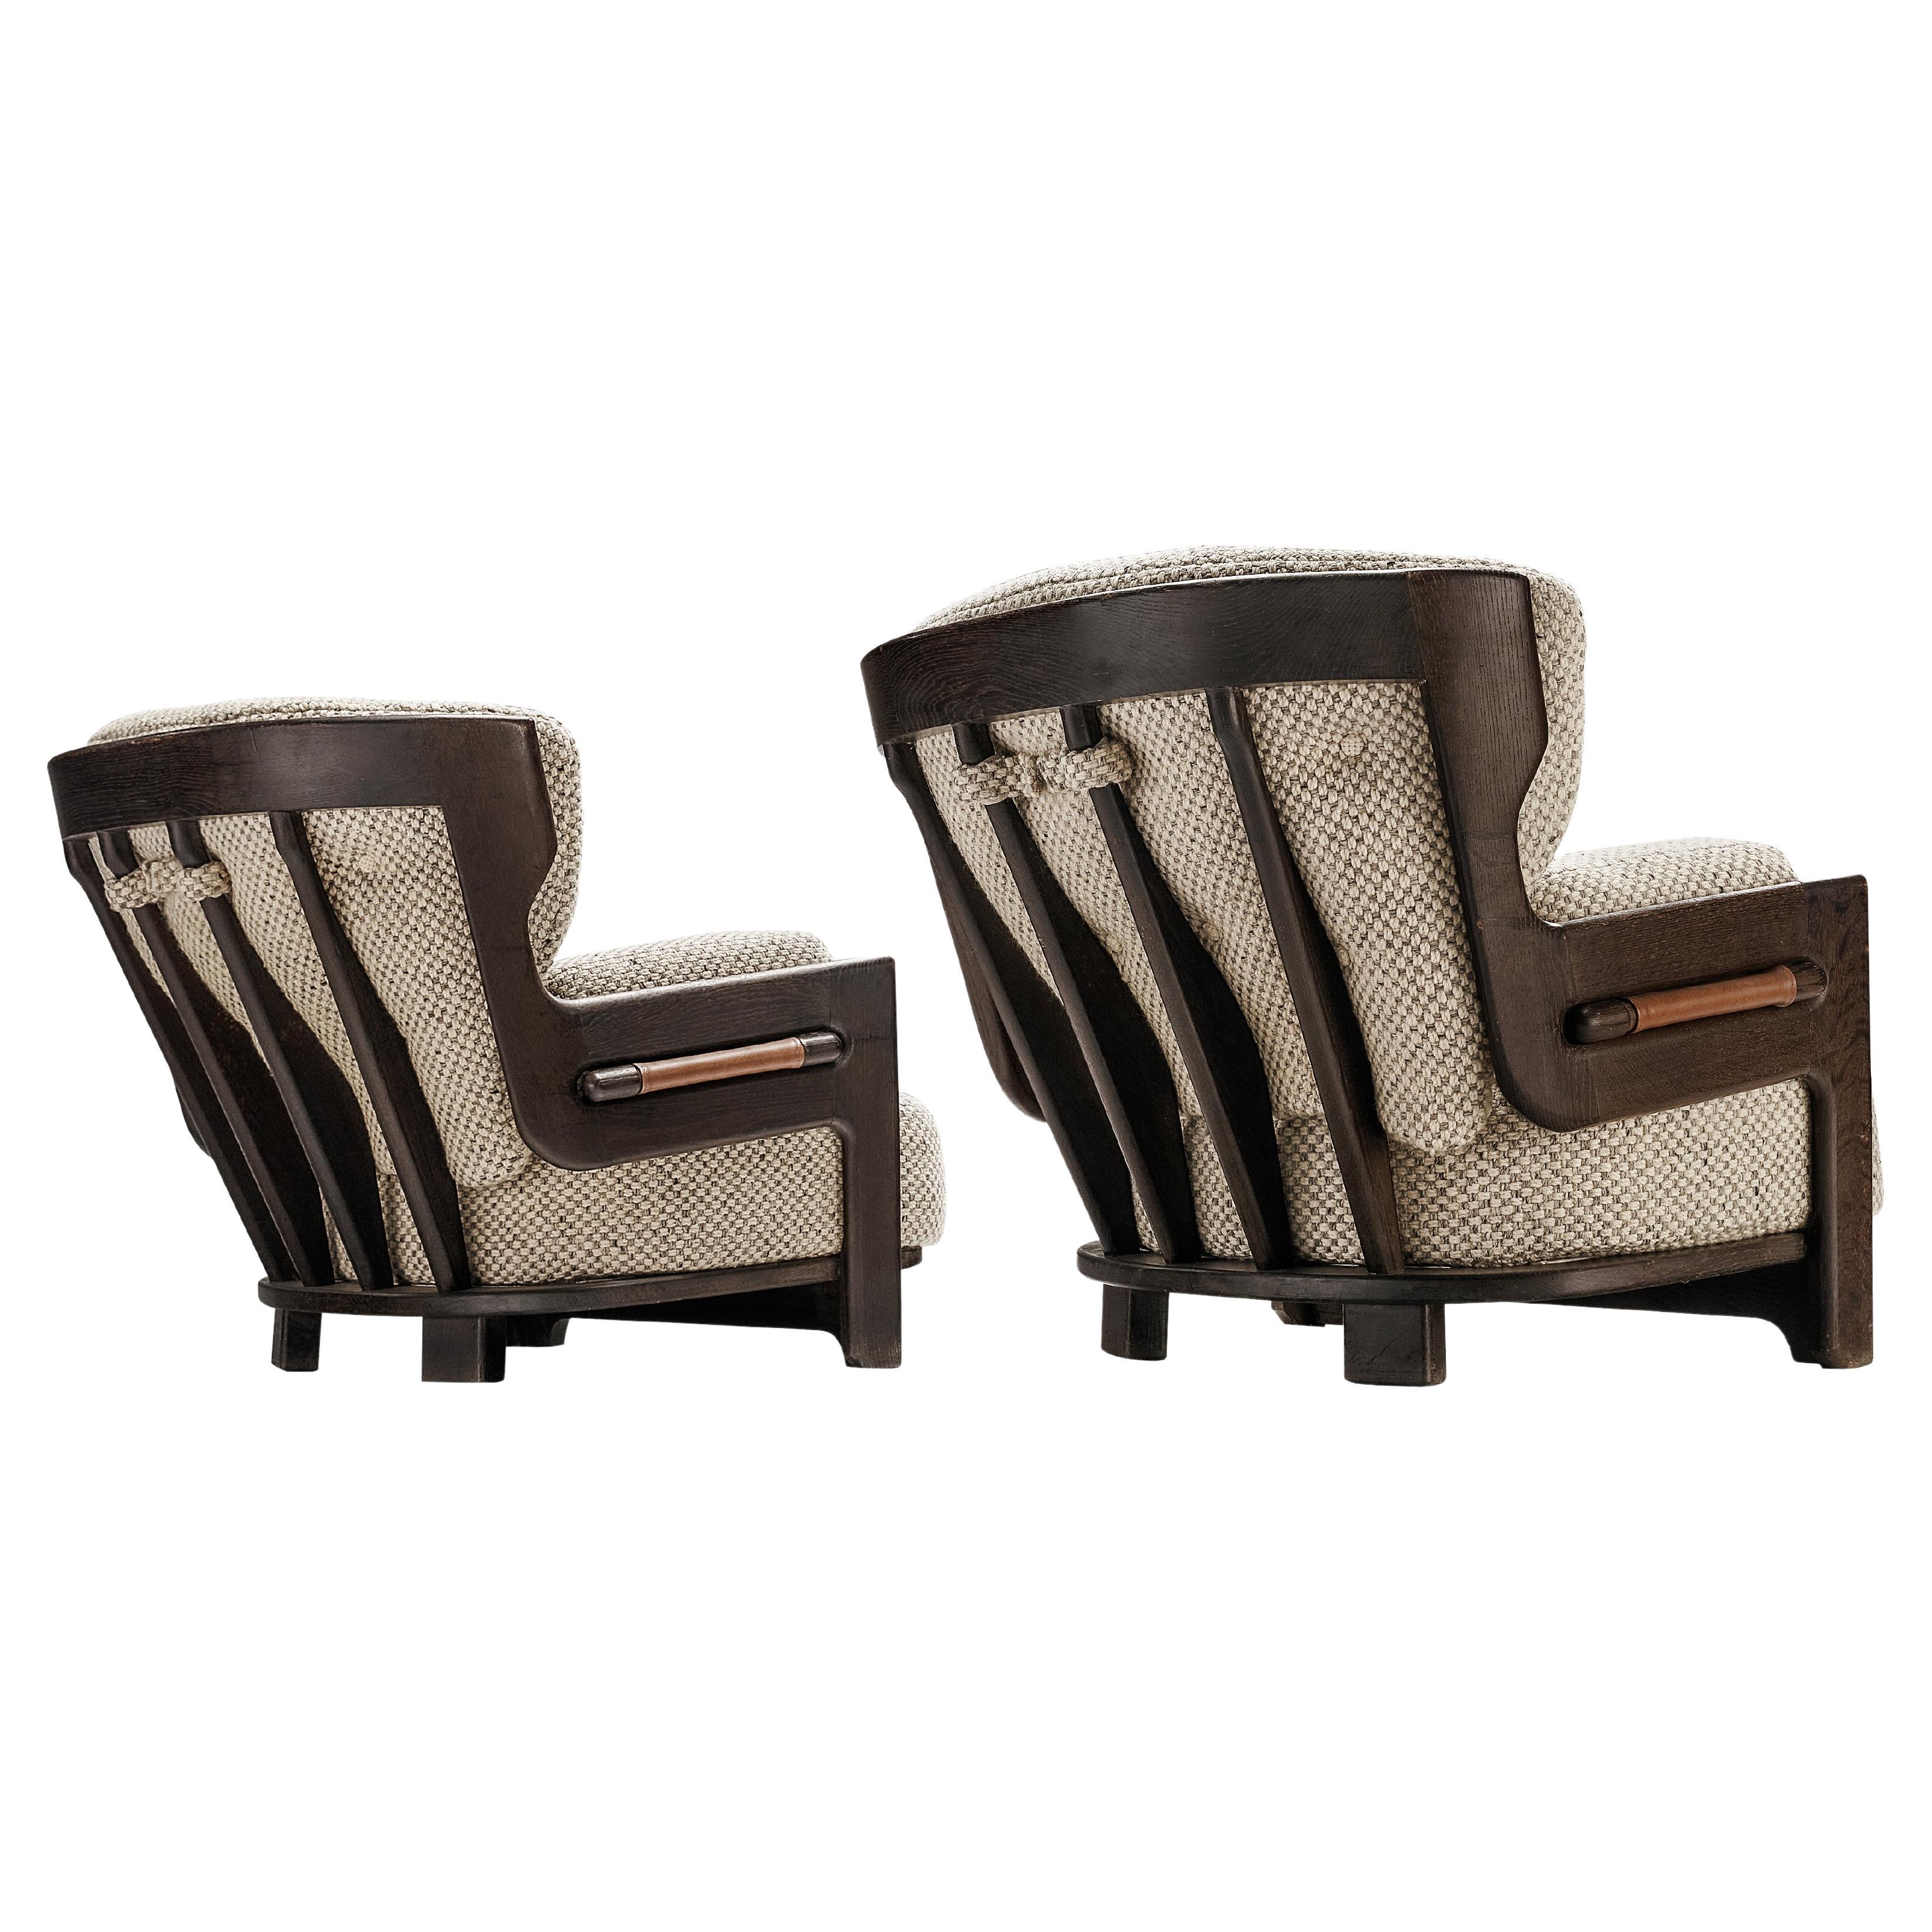 Guillerme & Chambron Pair of Lounge Chairs 'Denis' with Dark Brown Frames 